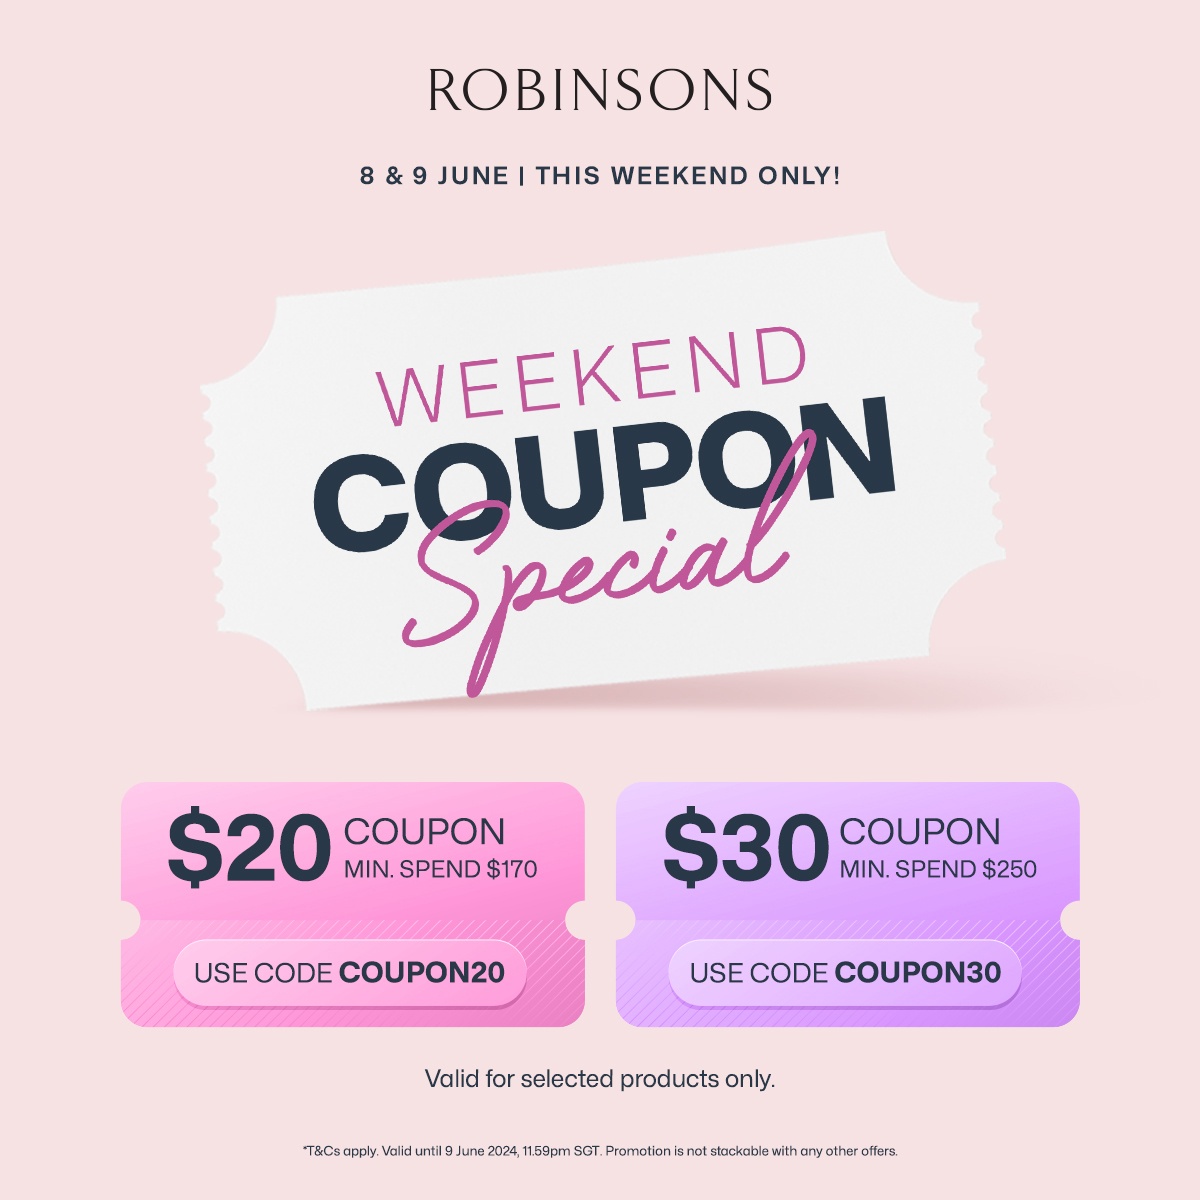 Weekend Coupon Special